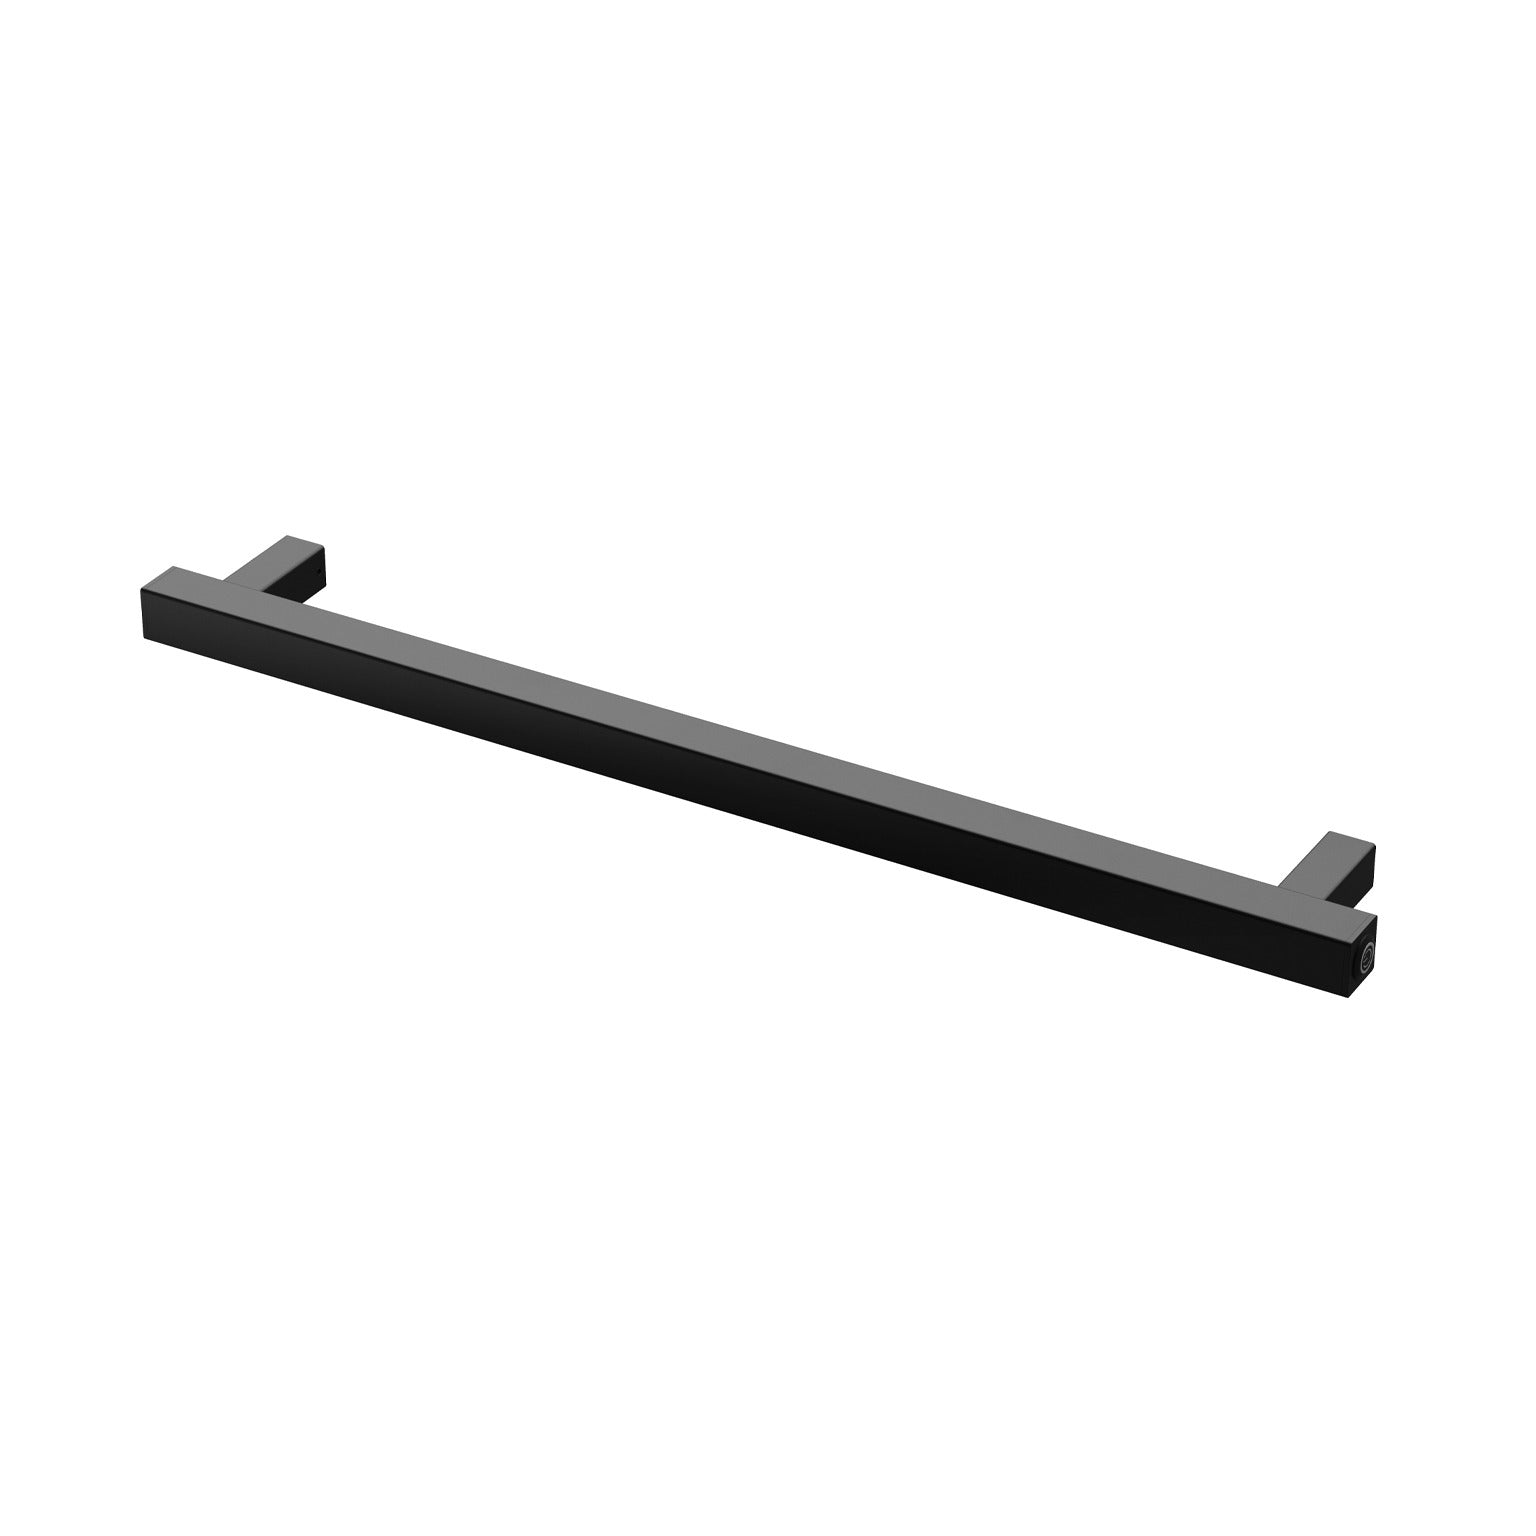 PHOENIX SQUARE SINGLE HEATED TOWEL RAIL MATTE BLACK (AVAILABLE IN 600MM AND 800MM)